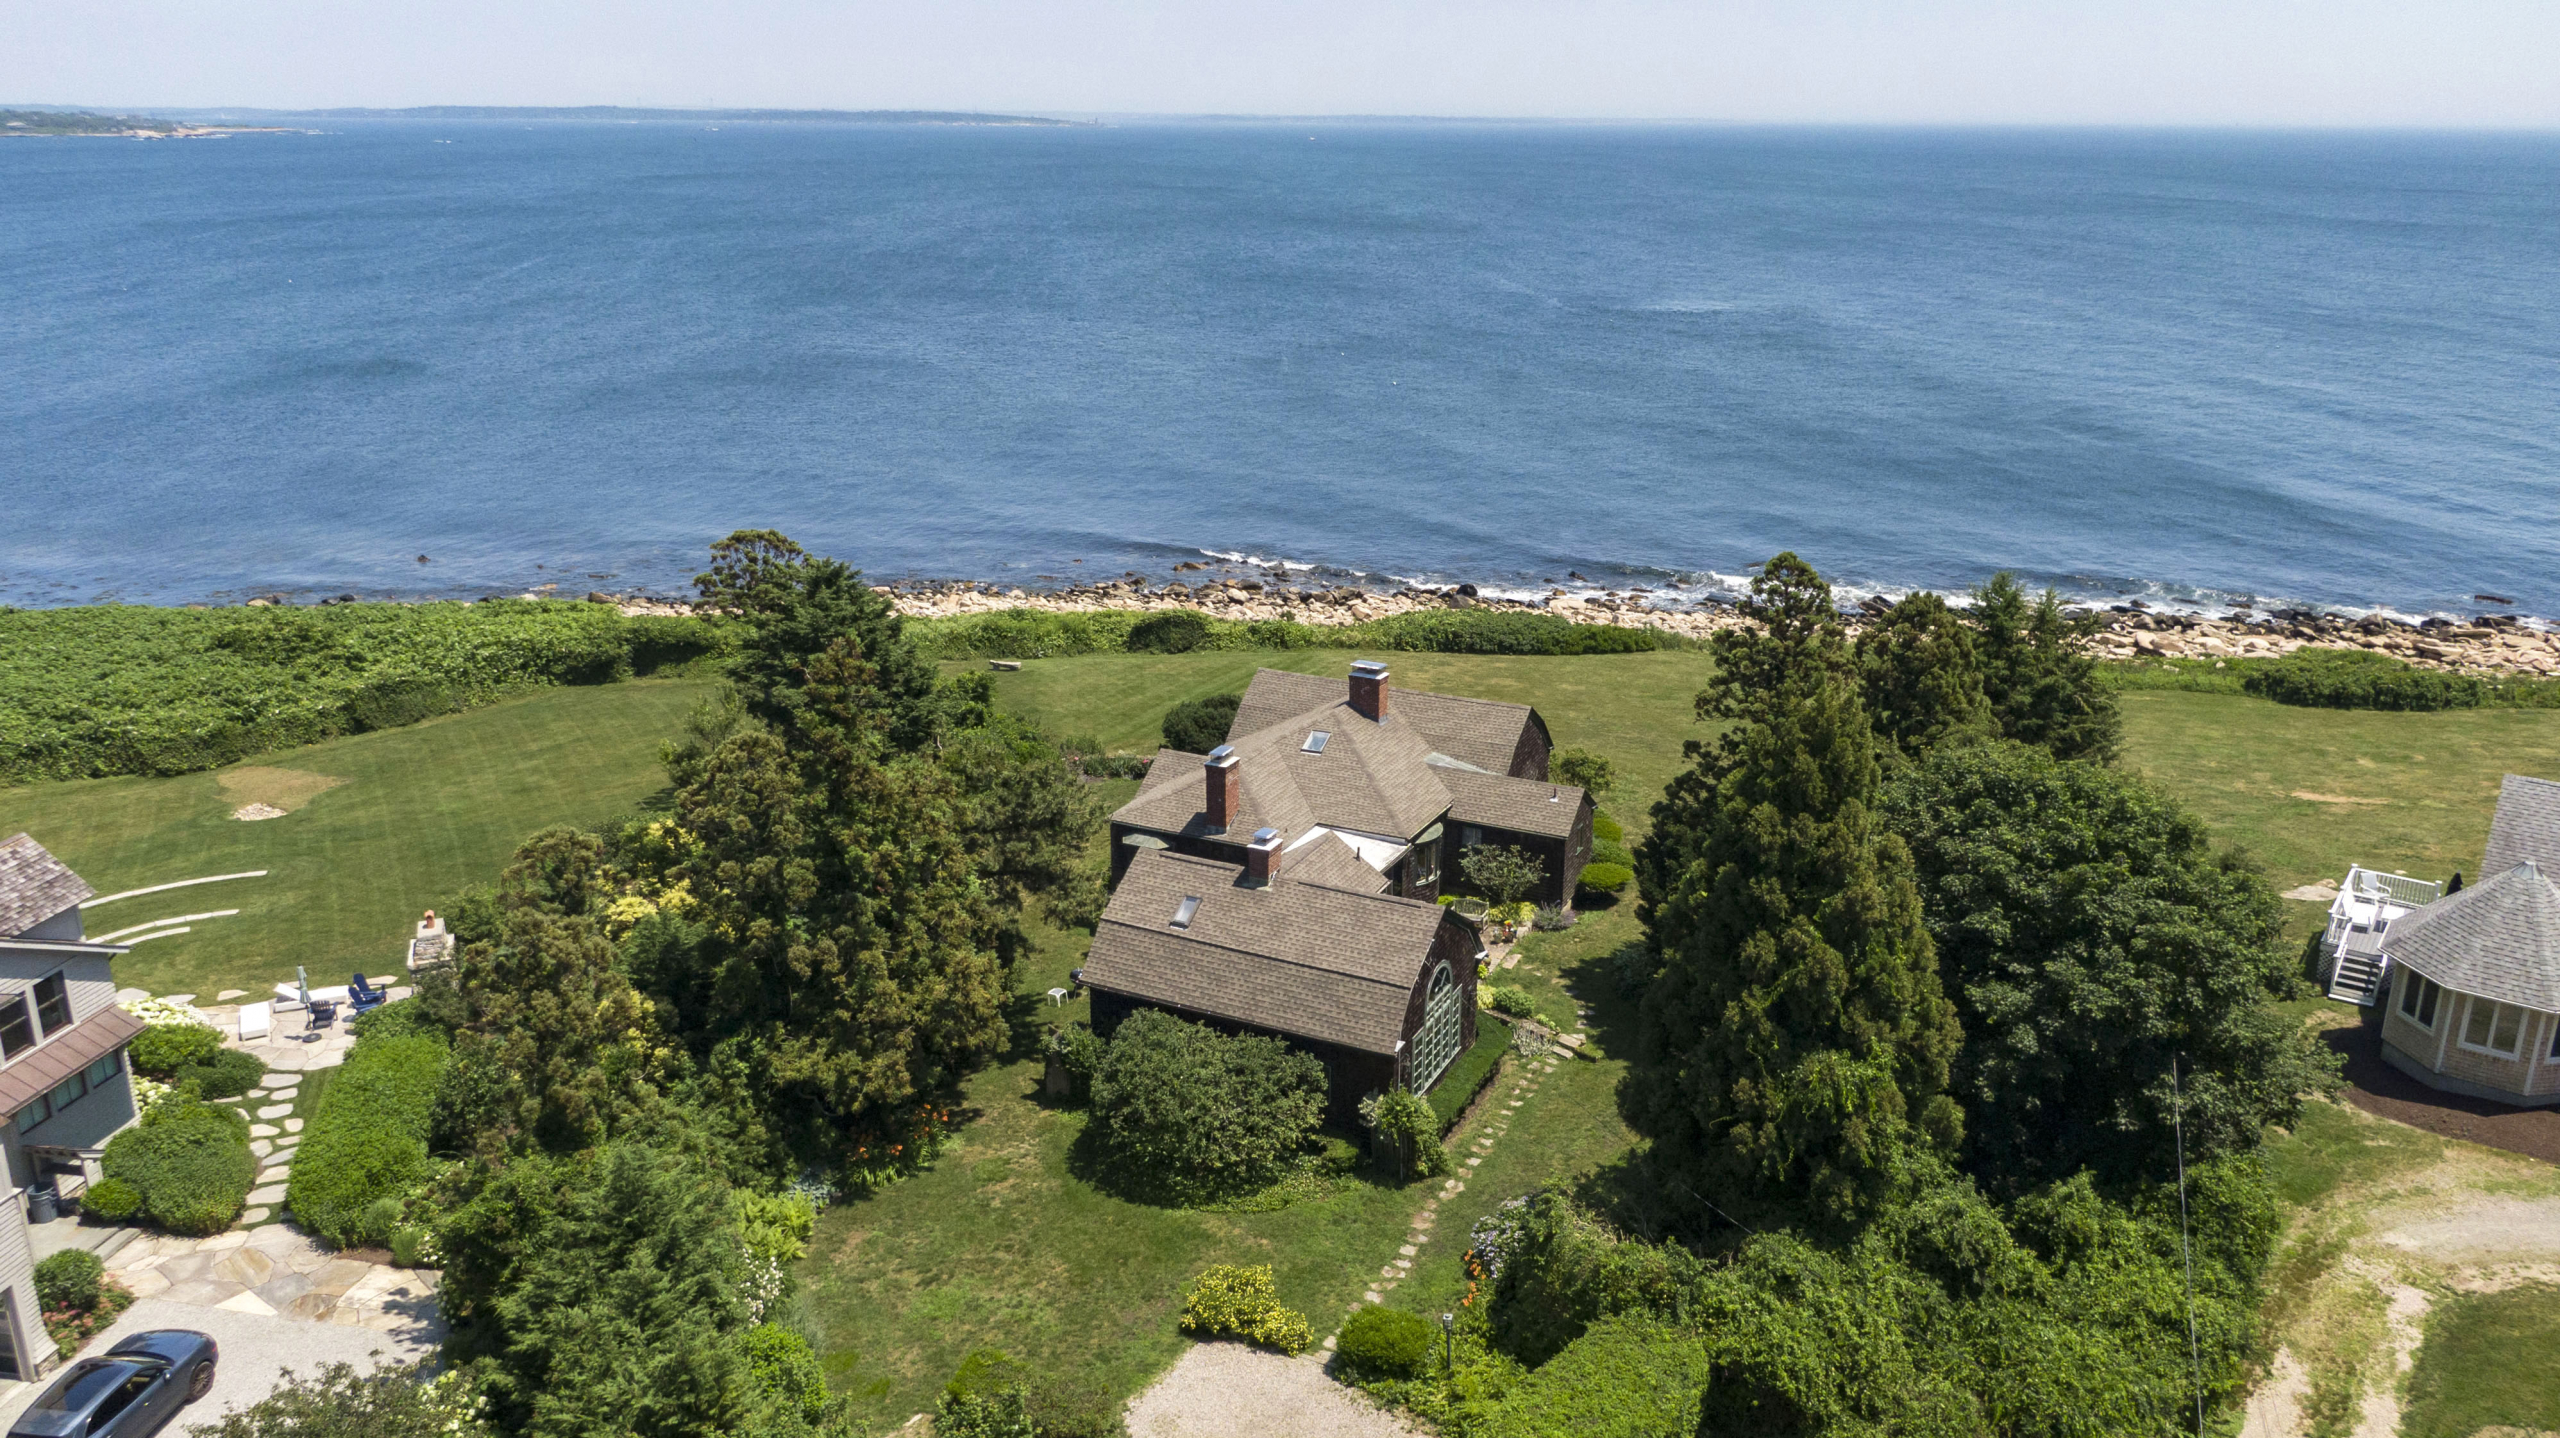 LILA DELMAN COMPASS SELLS OCEAN ROAD HOME FOR $4,825,000,  MARKING ONE OF THE TOP THREE SALES IN NARRAGANSETT YEAR-TO-DATE*